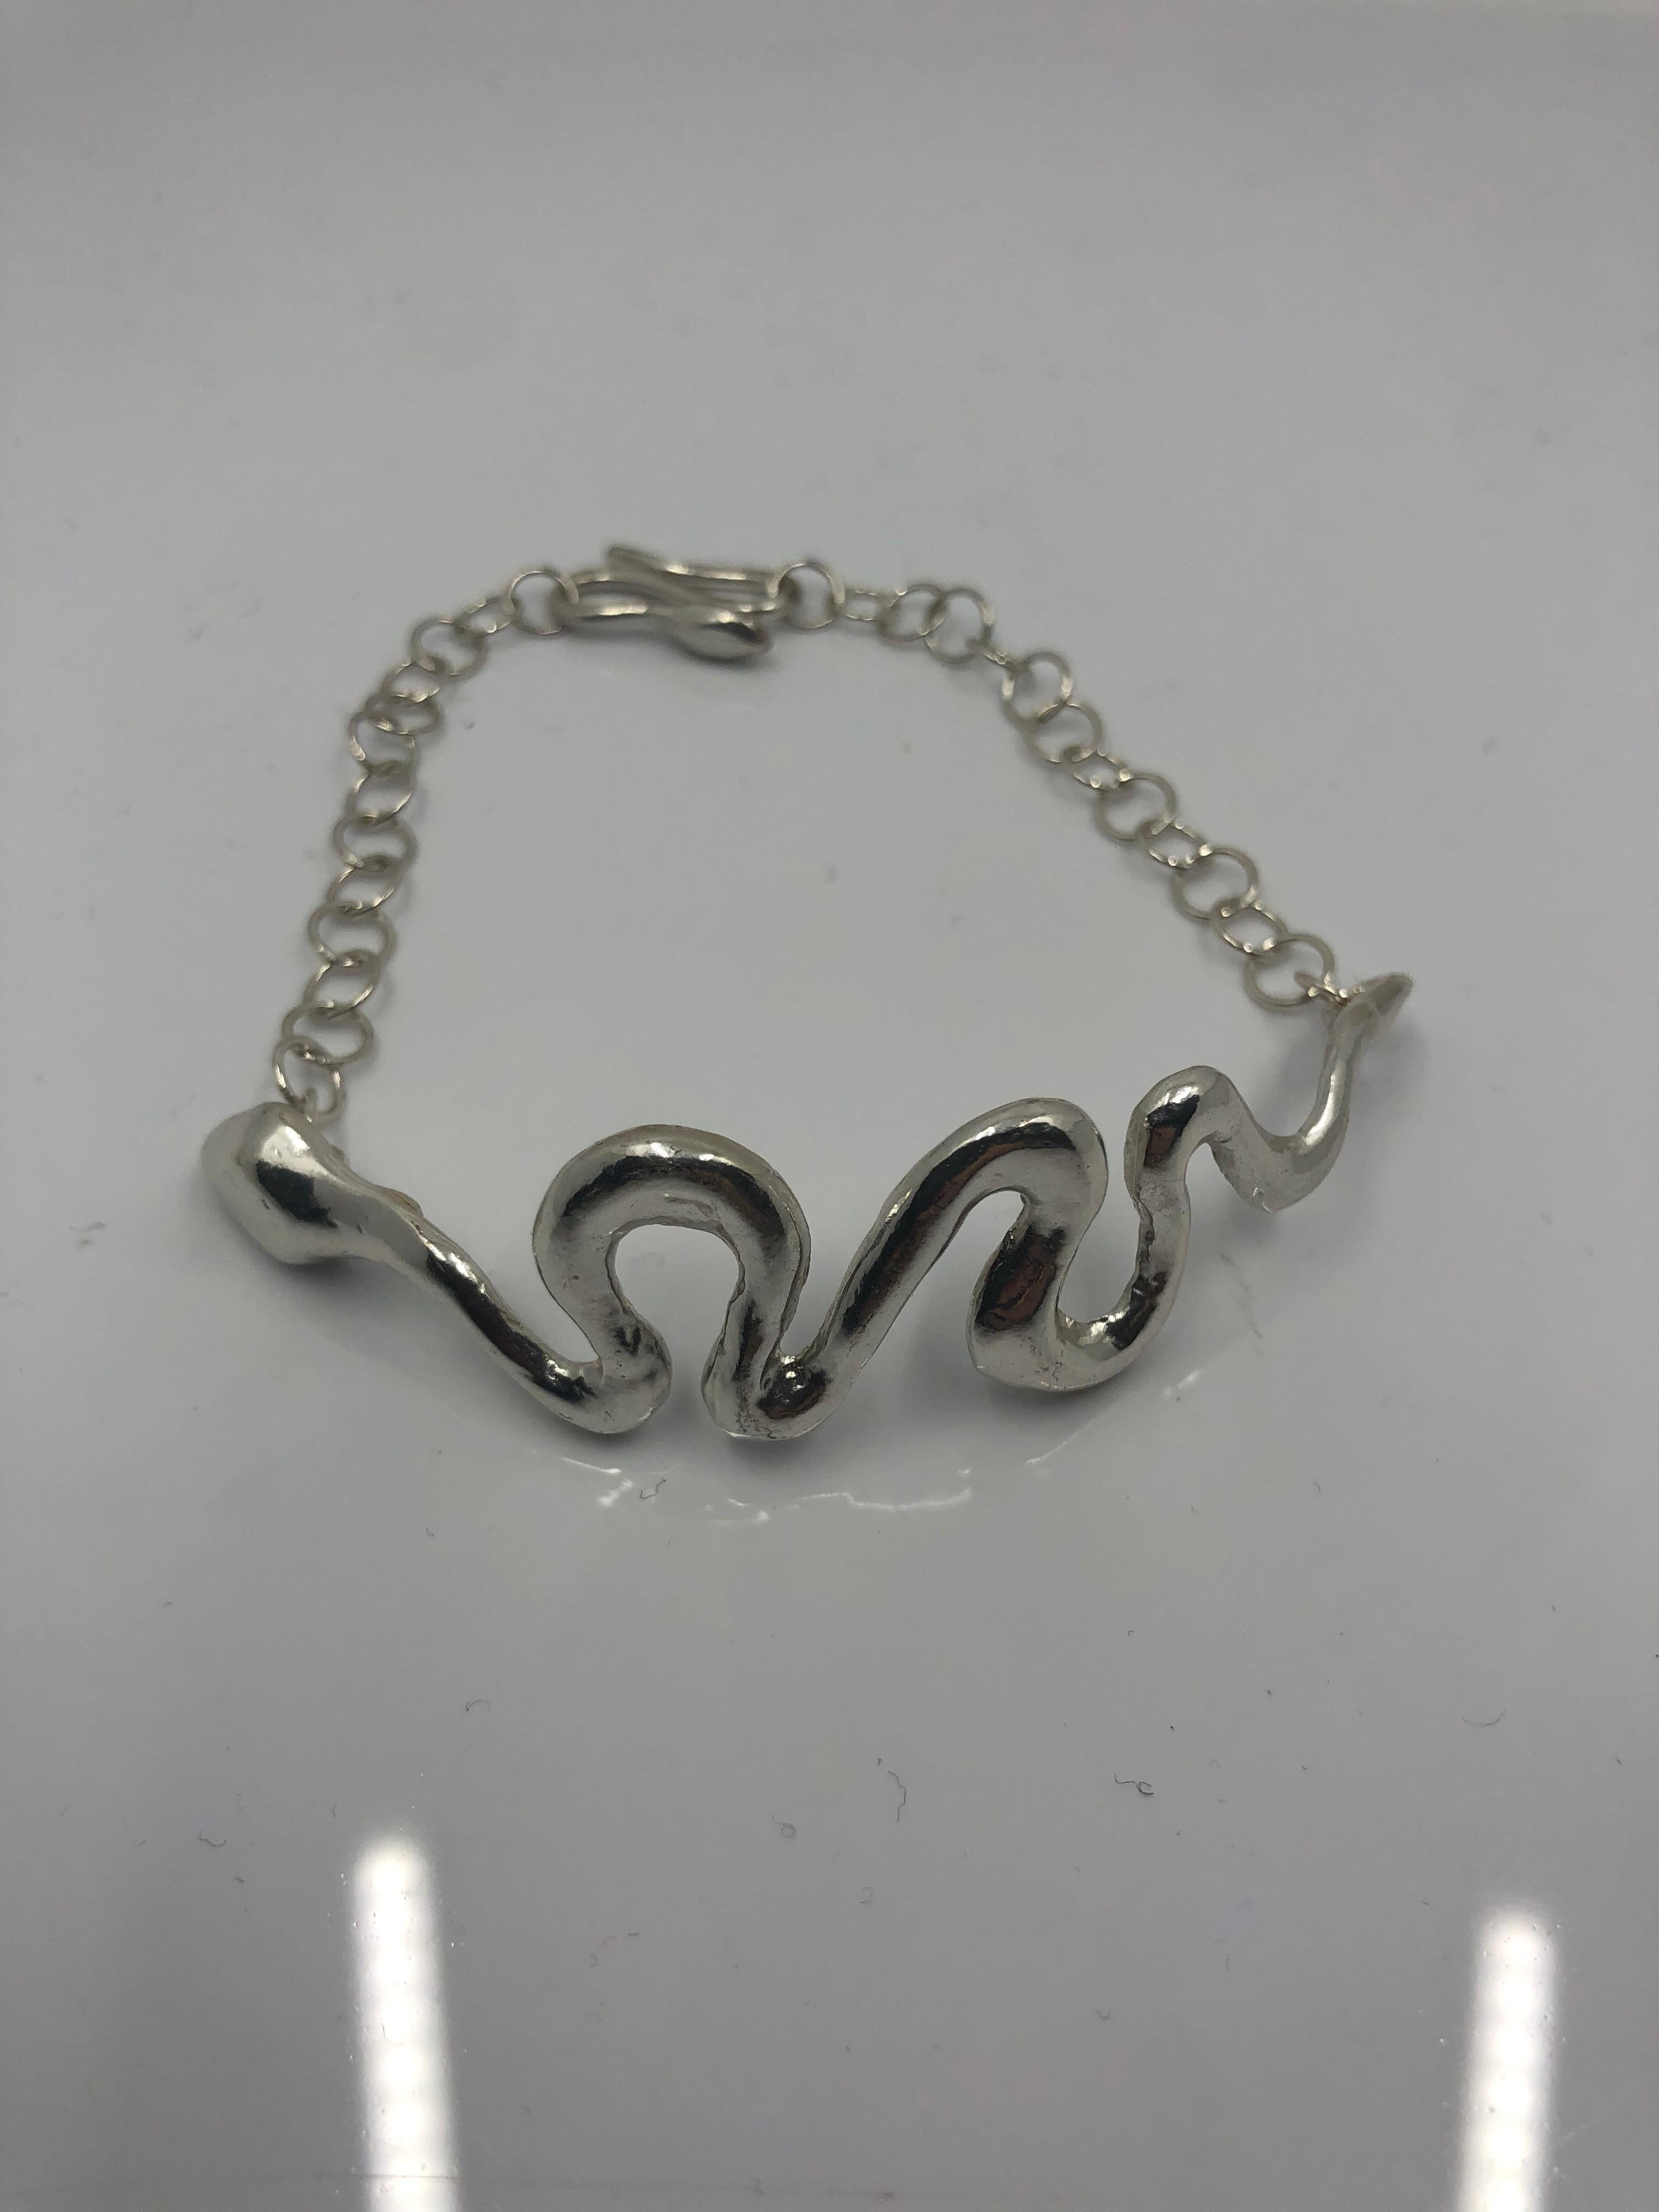 Giulia Barela’s Ribbon bracelet

A small snake wraps around a wrist sinuously, comforting and protective.

Materials: 925 silver 
Weight: 18,3 gr
Lenght: 19 cm clasp included, adjustable. 